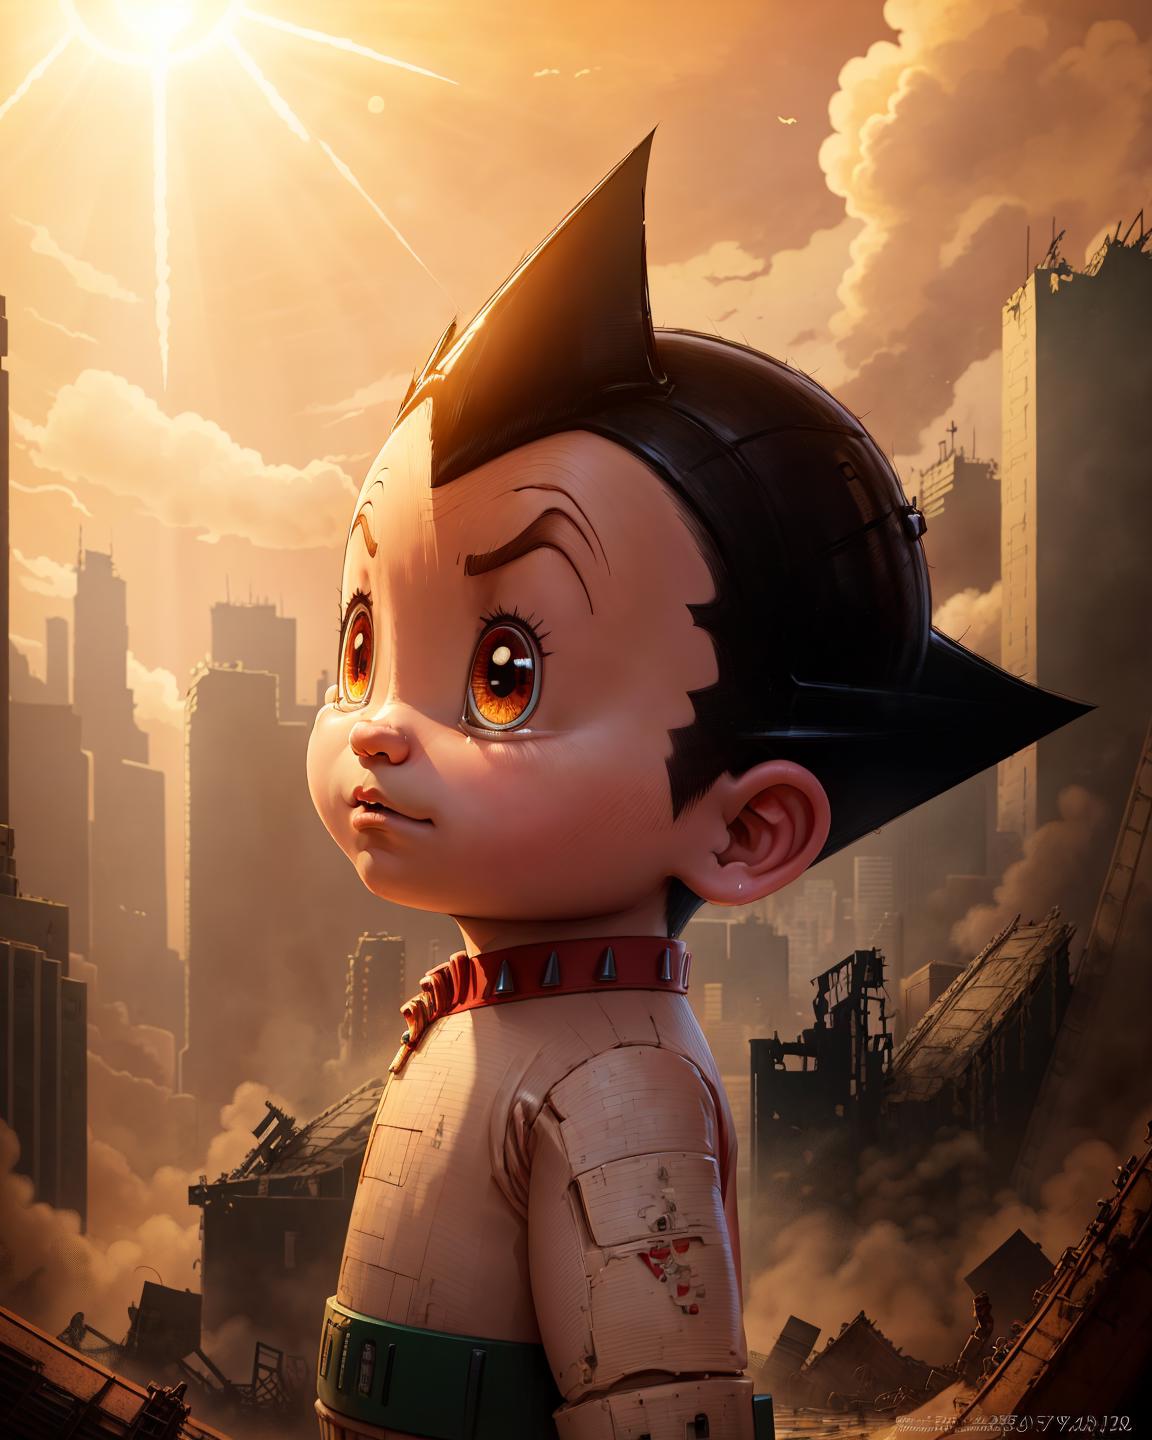 Astro Boy image by MrHong